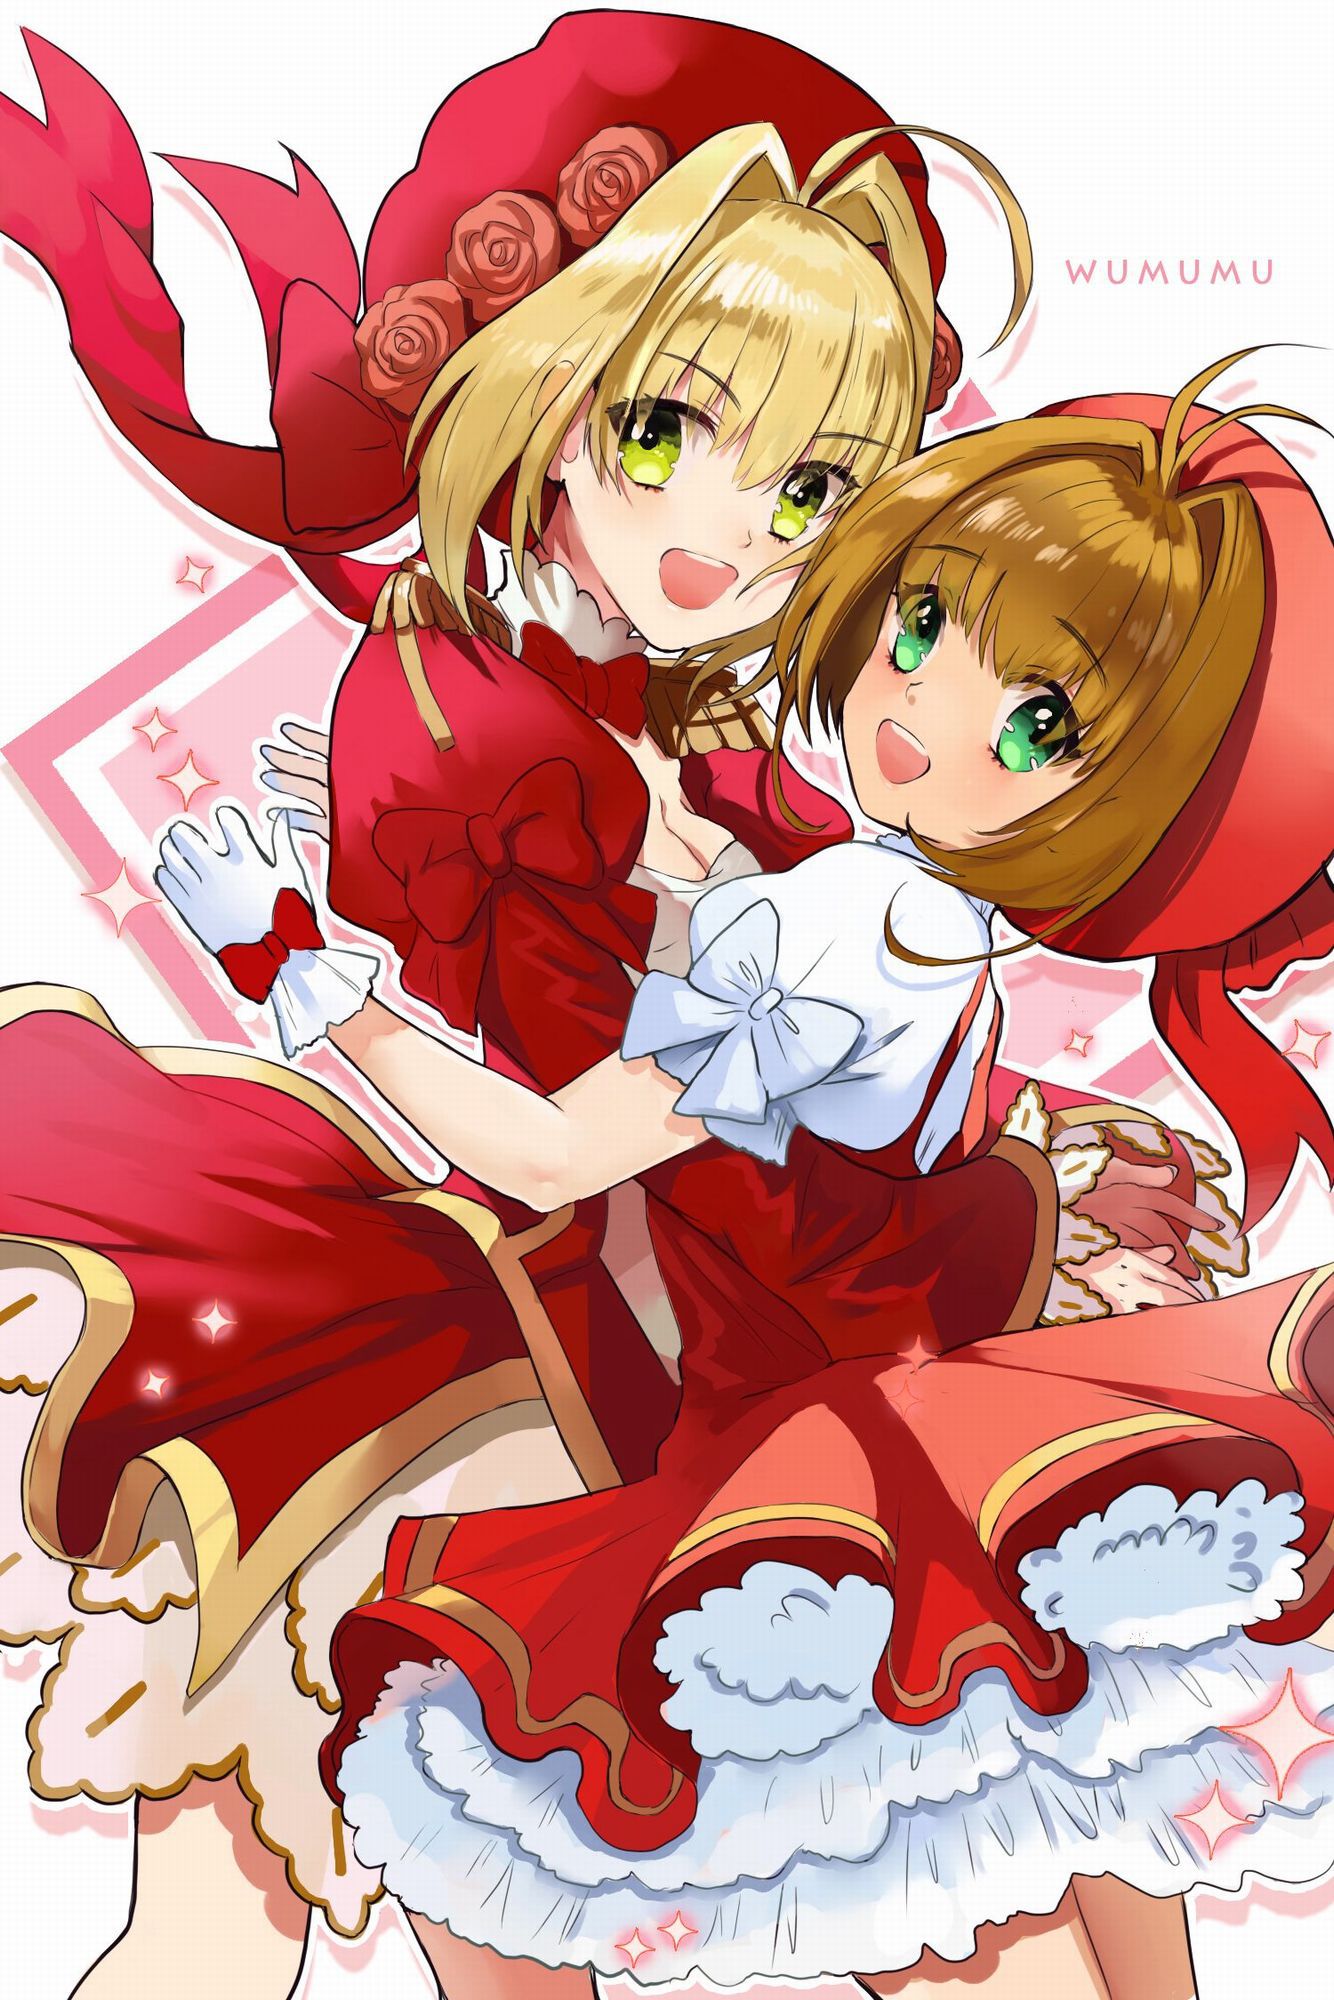 [Secondary ZIP] is about to start anime 100 pieces of cute image summary of Nero Claudius so soon 32